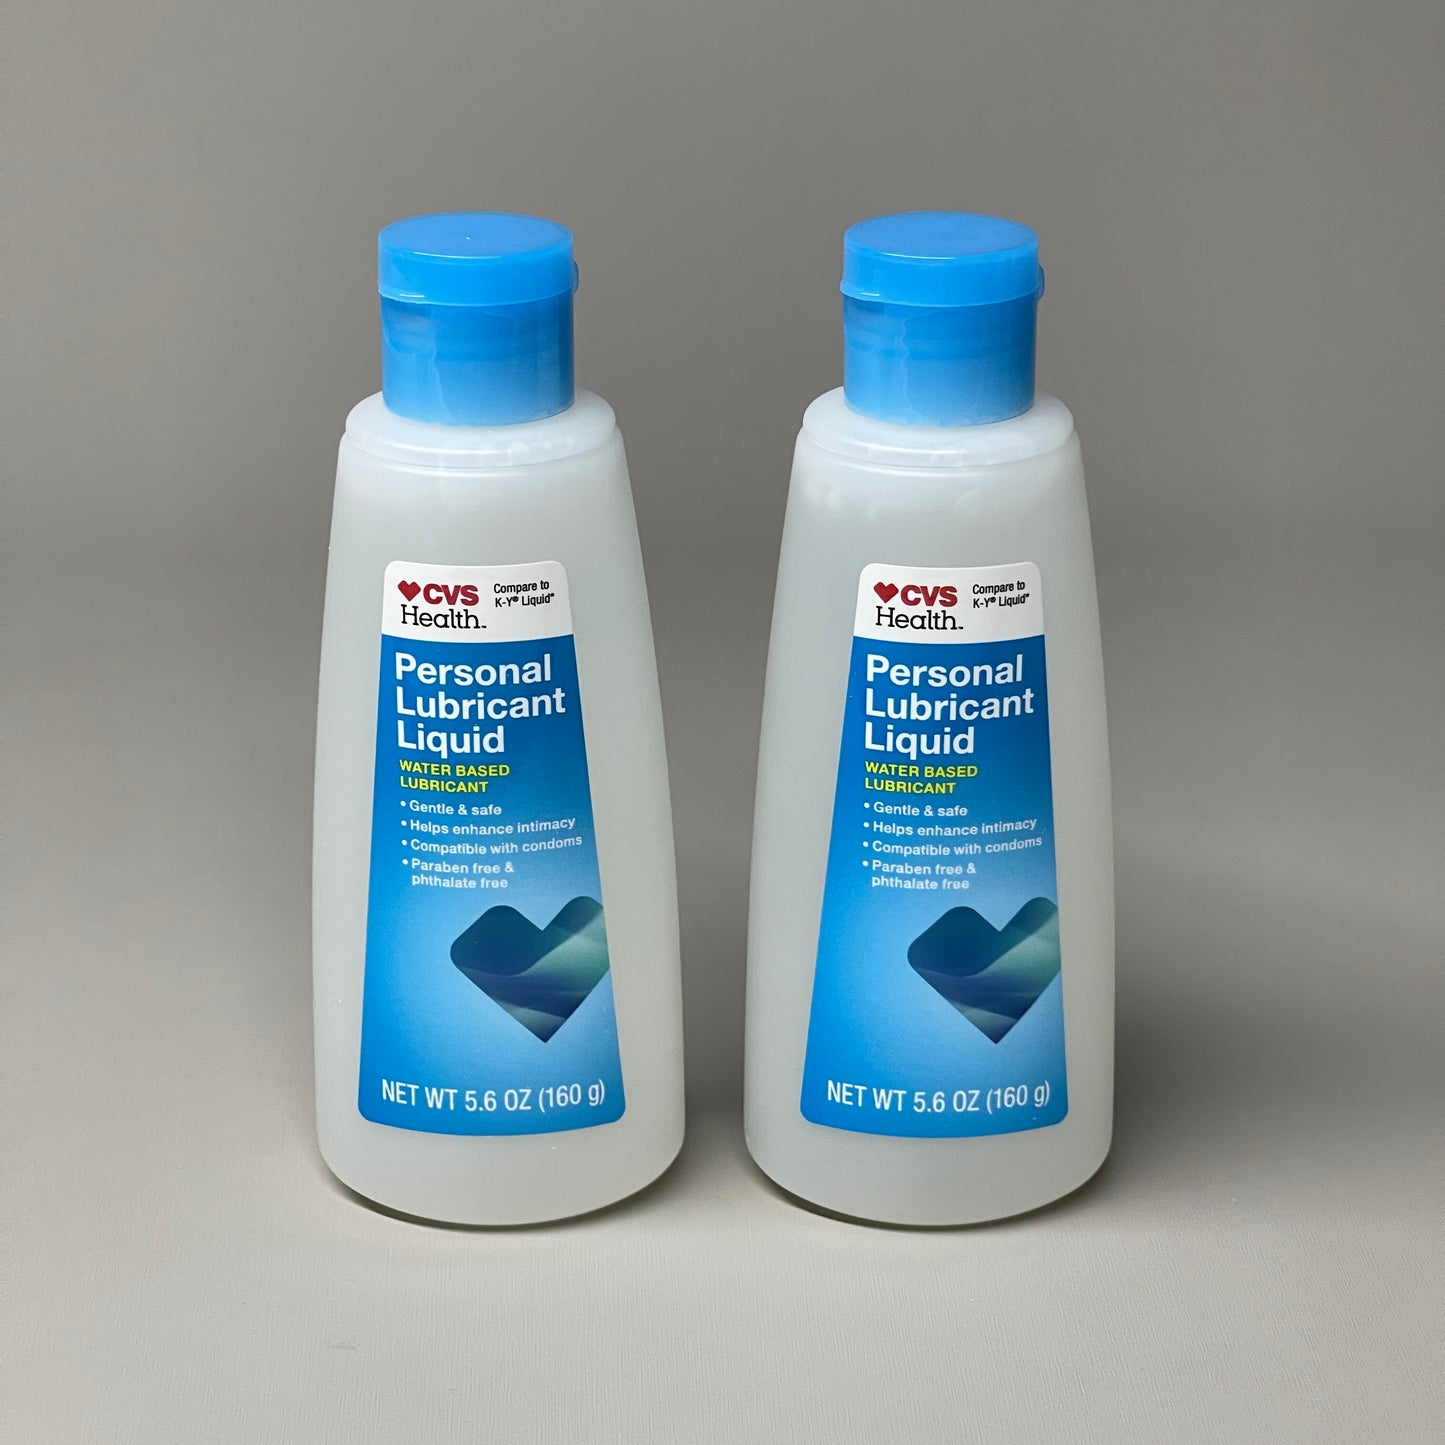 CVS HEALTH Personal Lubricant 2-PACK Water-Based 5.6 oz Exp 9/24 (New)